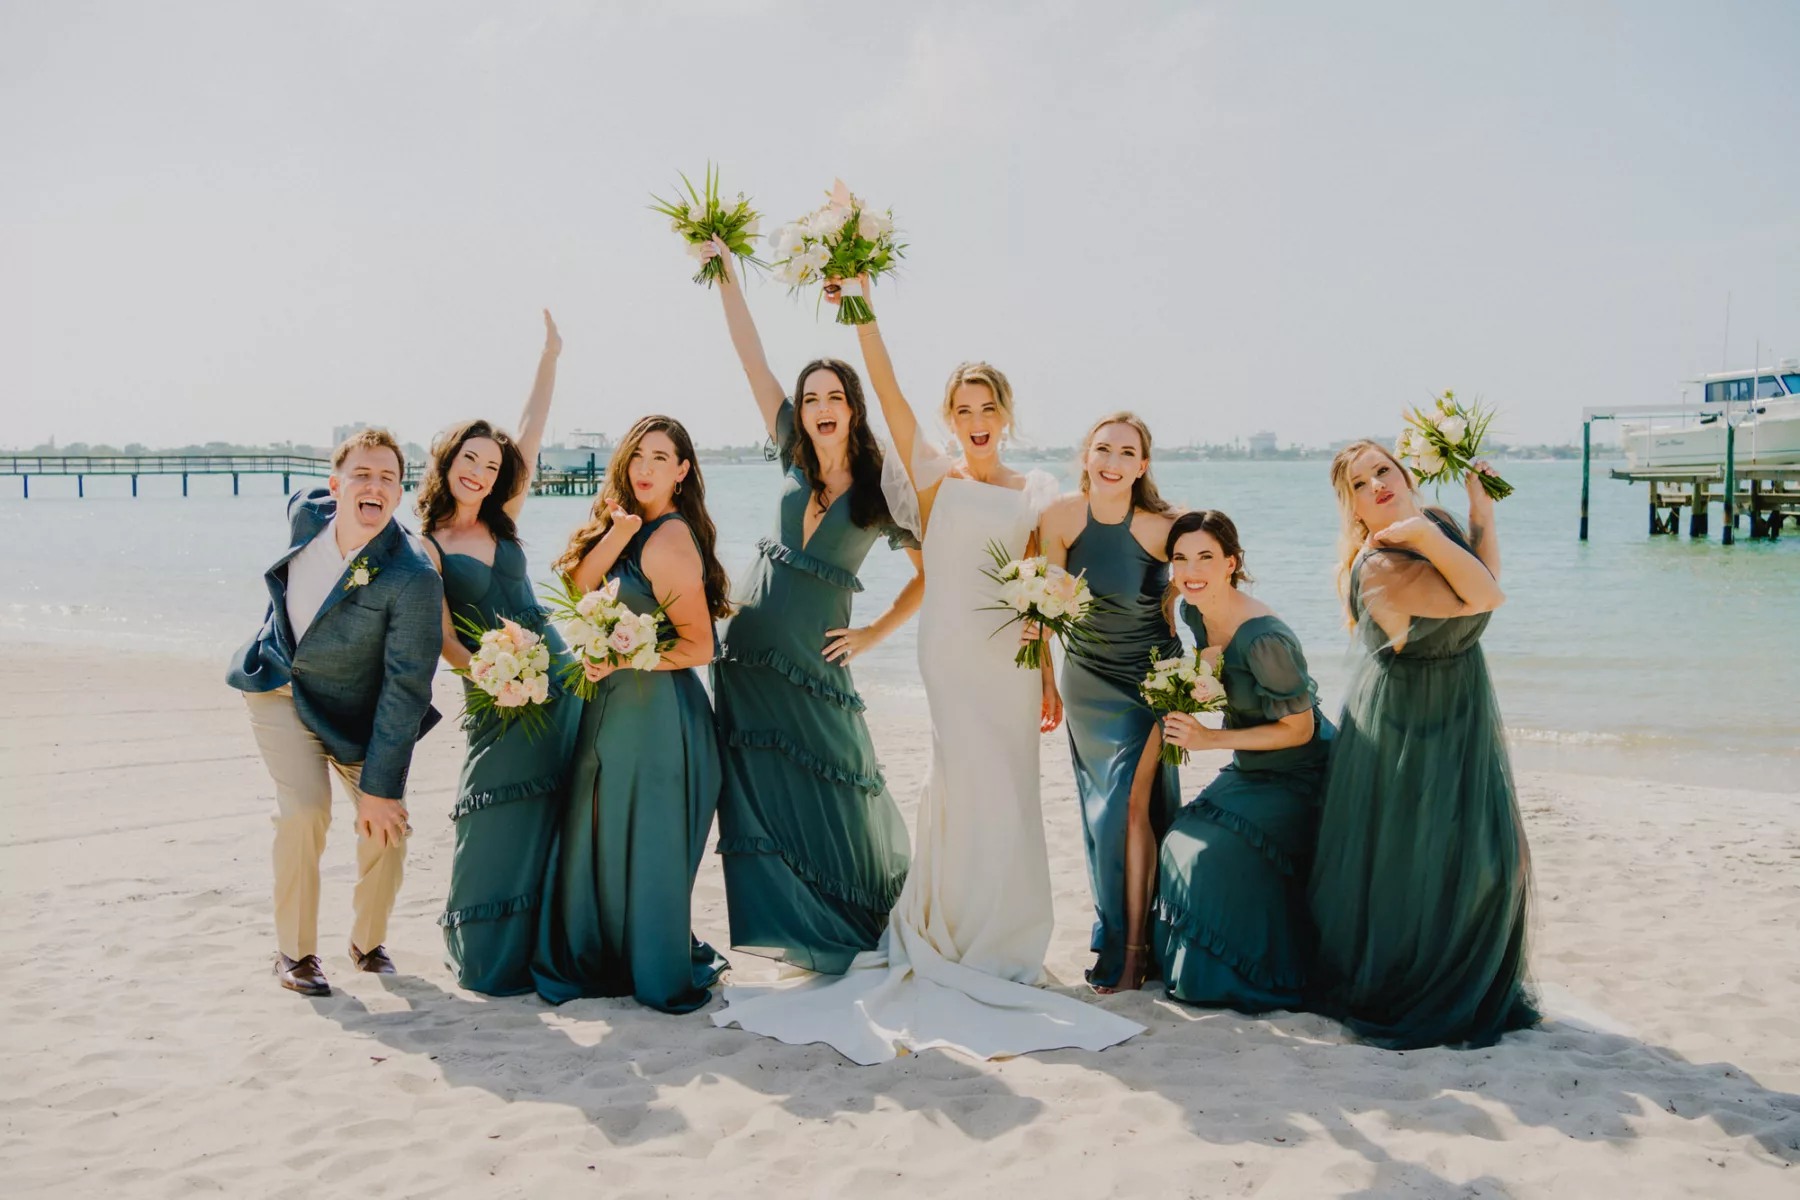 Mismatched Eucalyptus Green Bridesmaid Dresses Inspiration | Green and Khaki Bridesman Suit Ideas | Classic White Satin Fit and Flare Justin Alexander Wedding Dress with Tulle Cape Veil